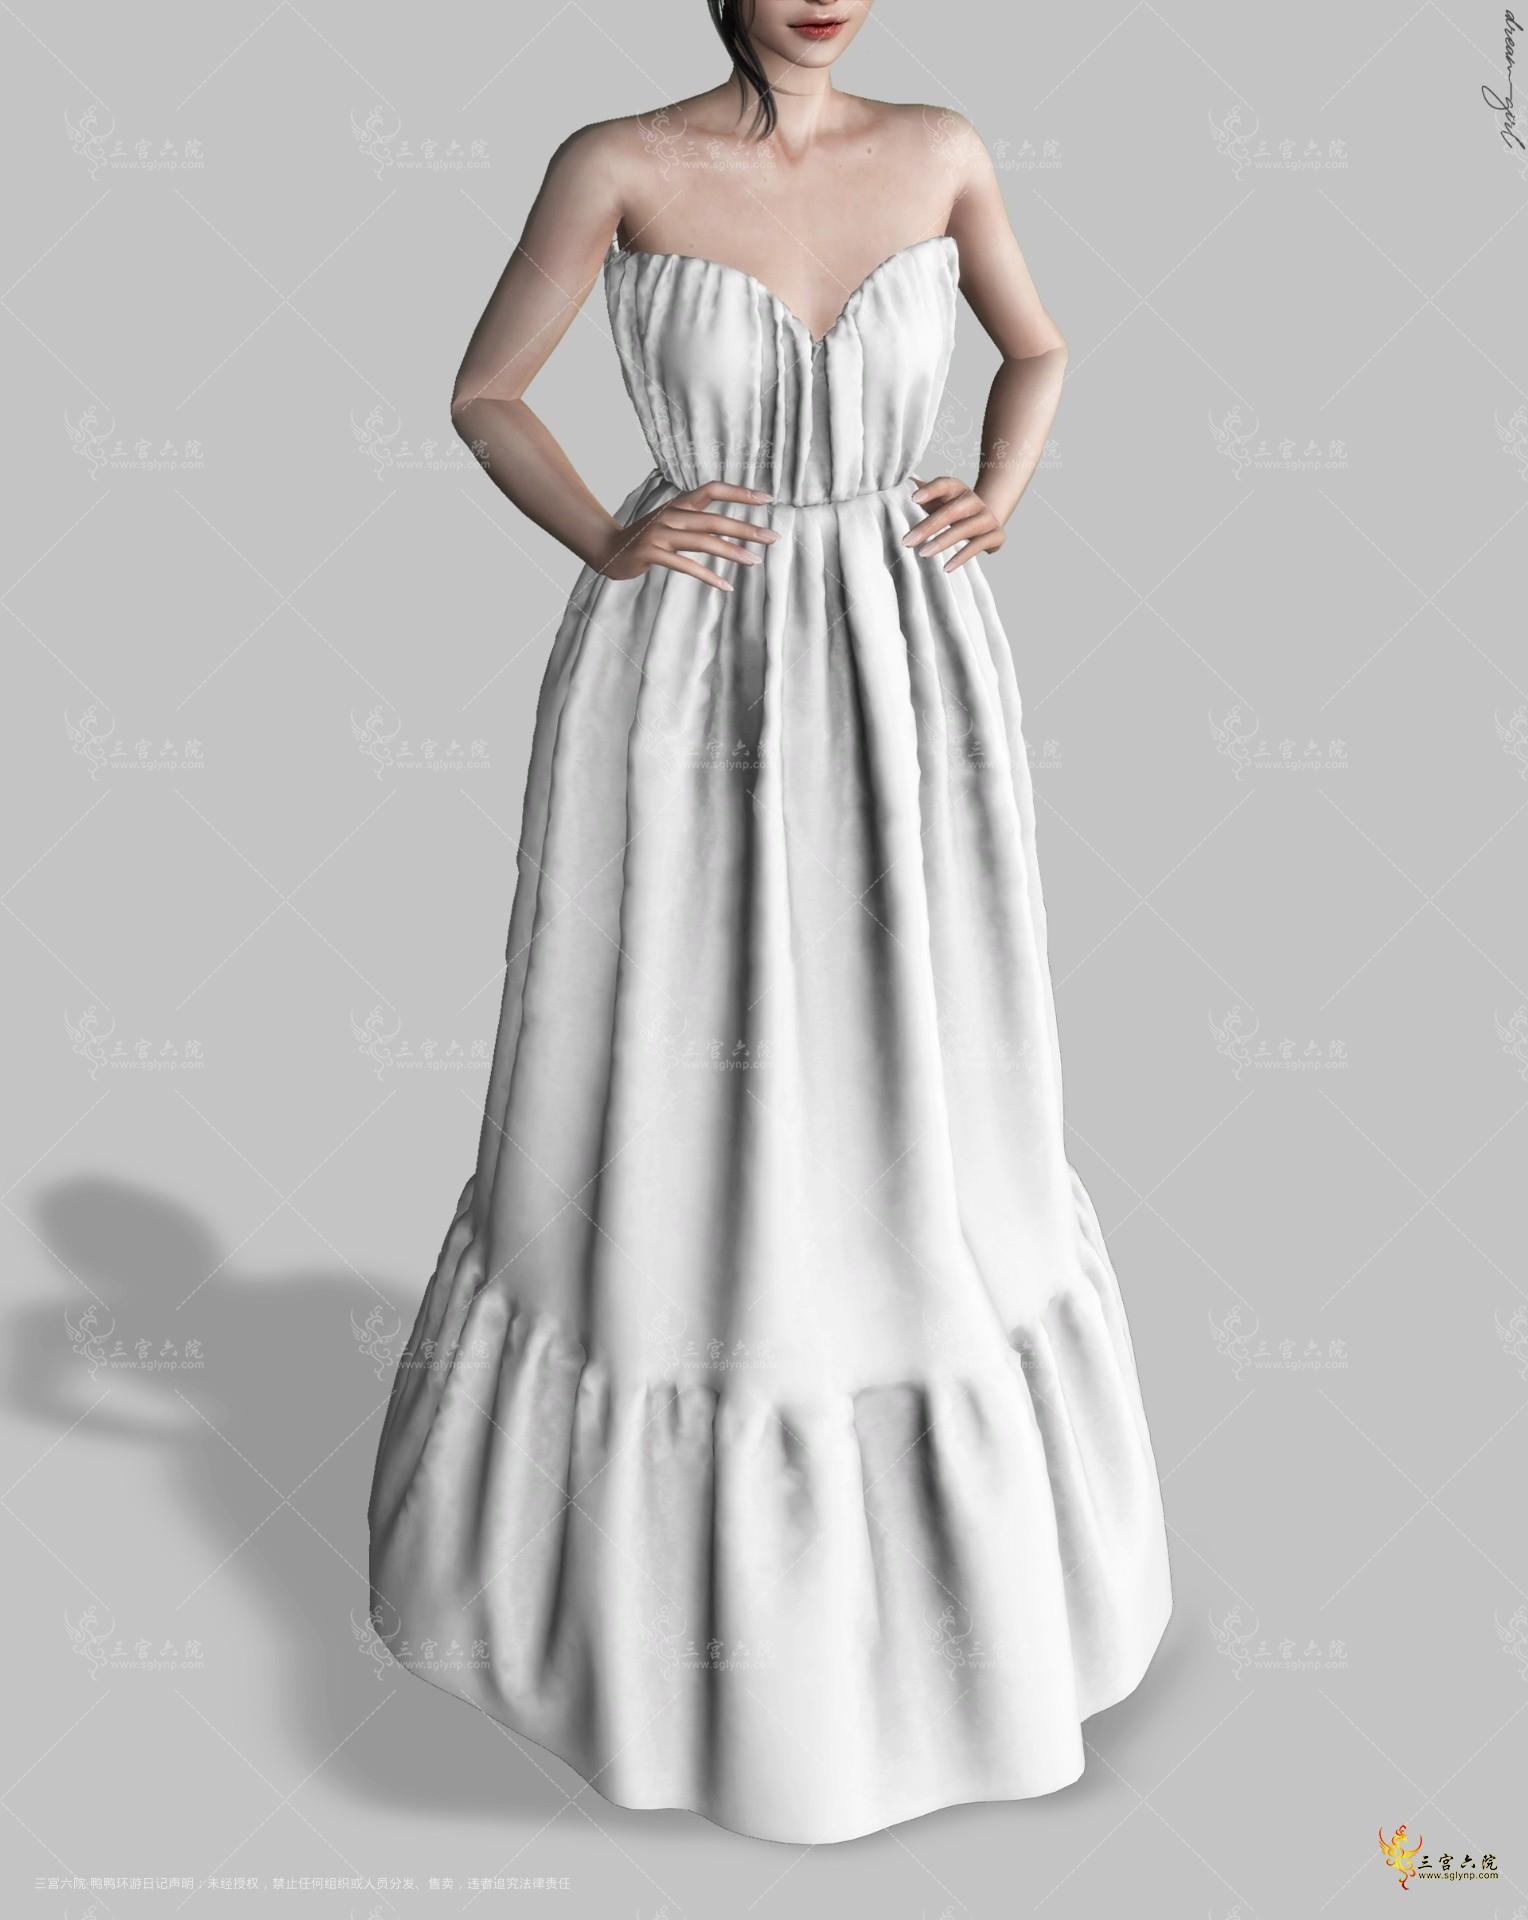 simplegown1.png